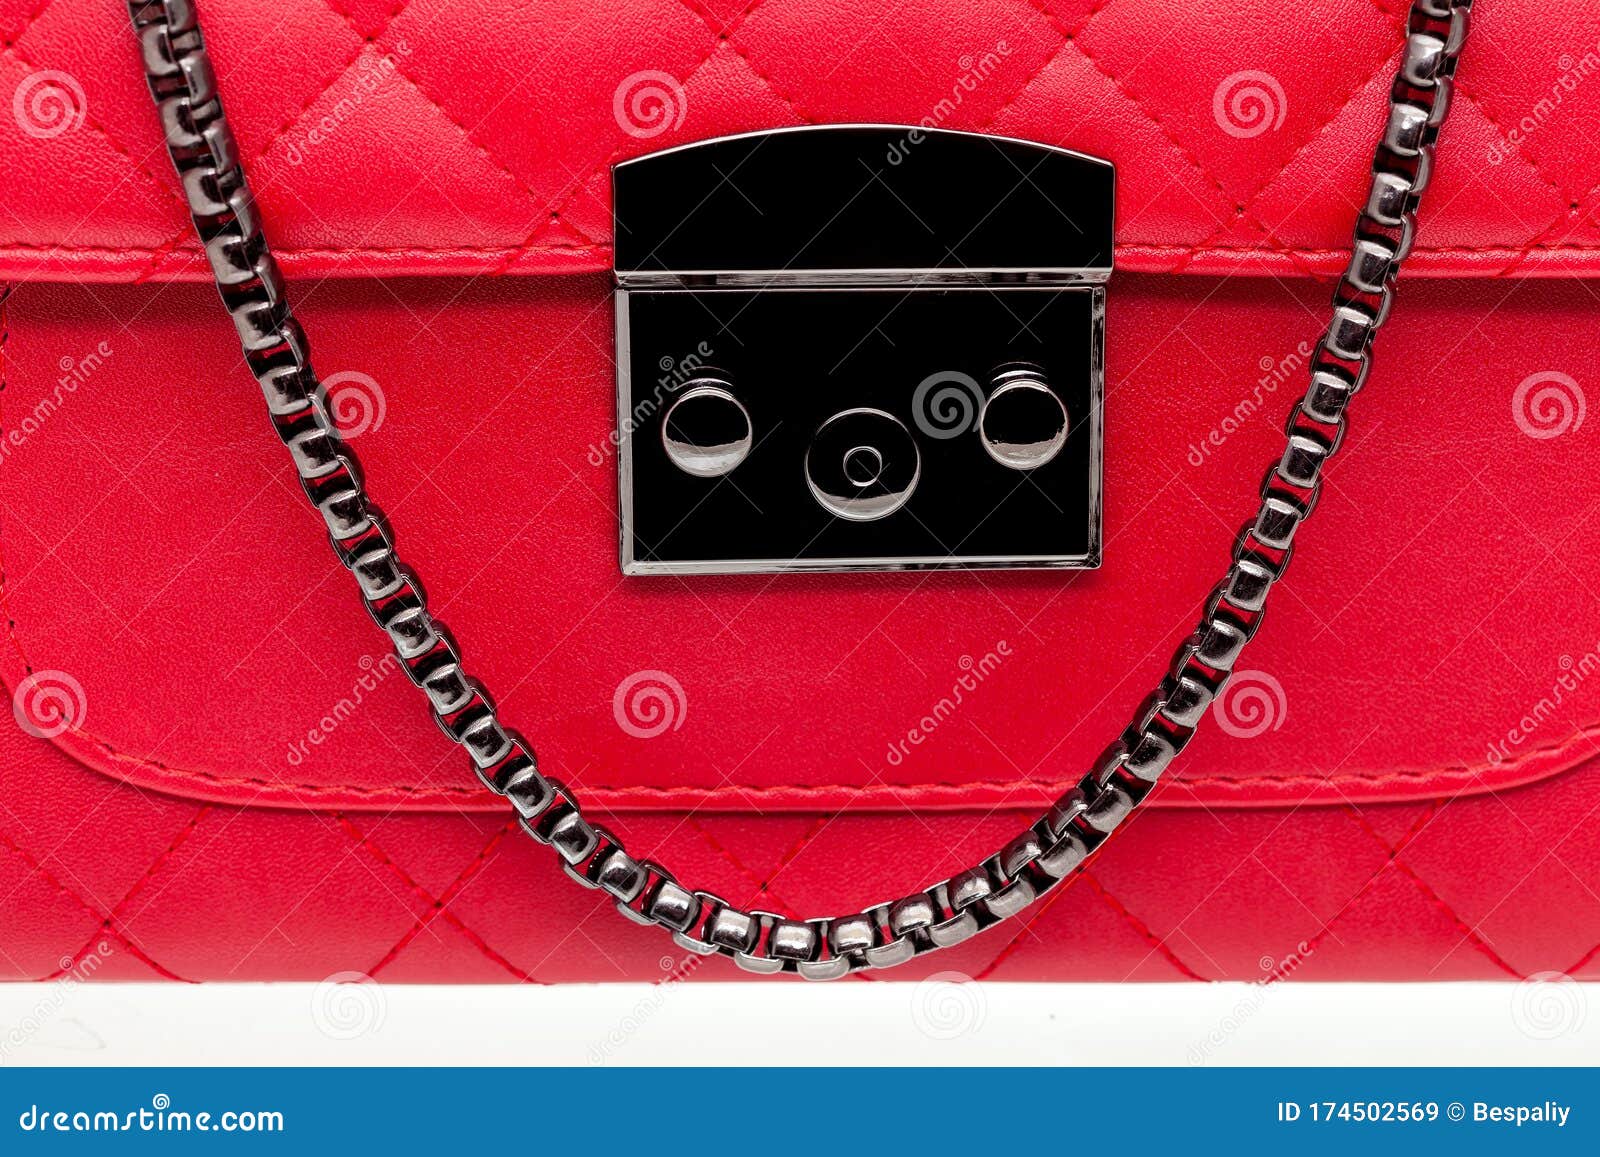 Woman`s Handbag Lock on Red Leather. Stock Image - Image of details ...